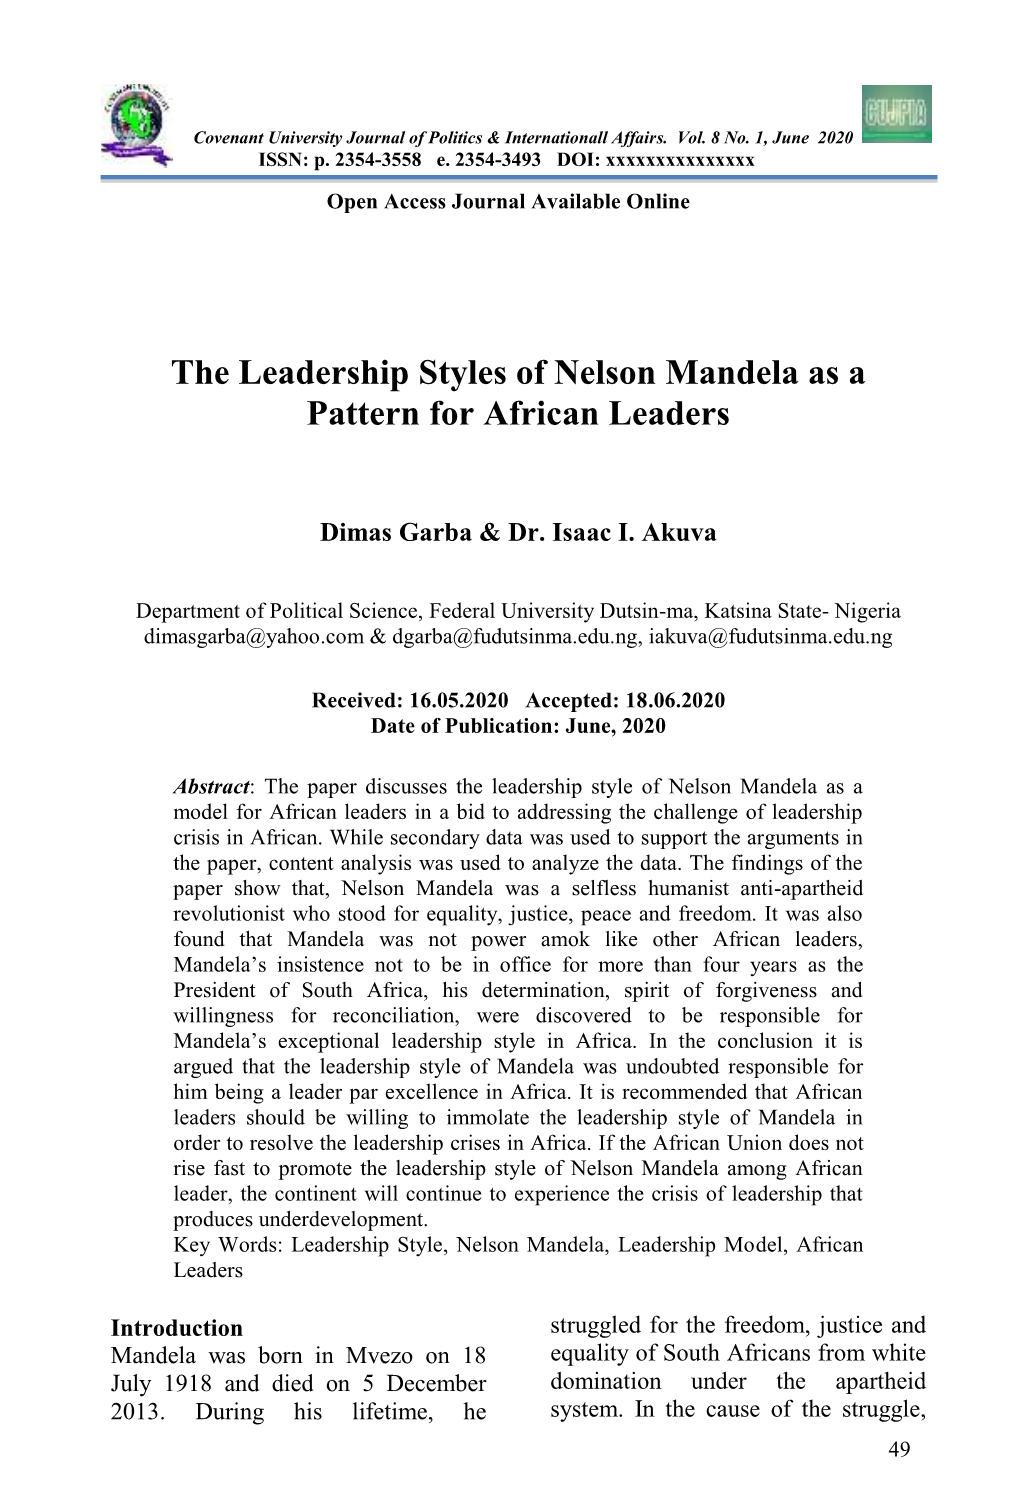 The Leadership Styles of Nelson Mandela As a Pattern for African Leaders